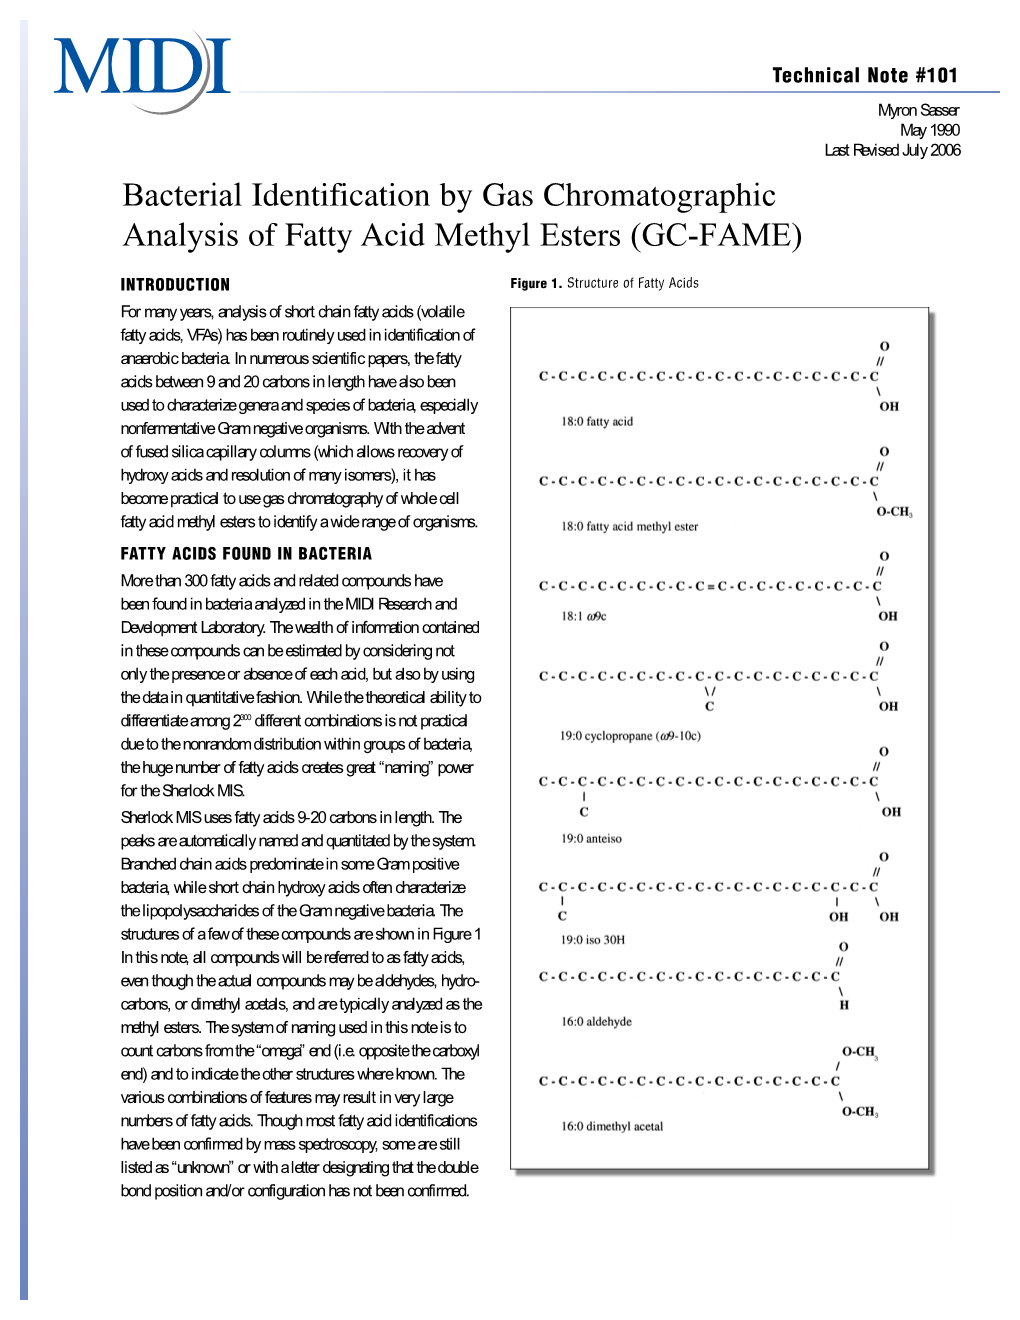 Bacterial Identification by Gas Chromatographic Analysis of Fatty Acid Methyl Esters (GC-FAME)